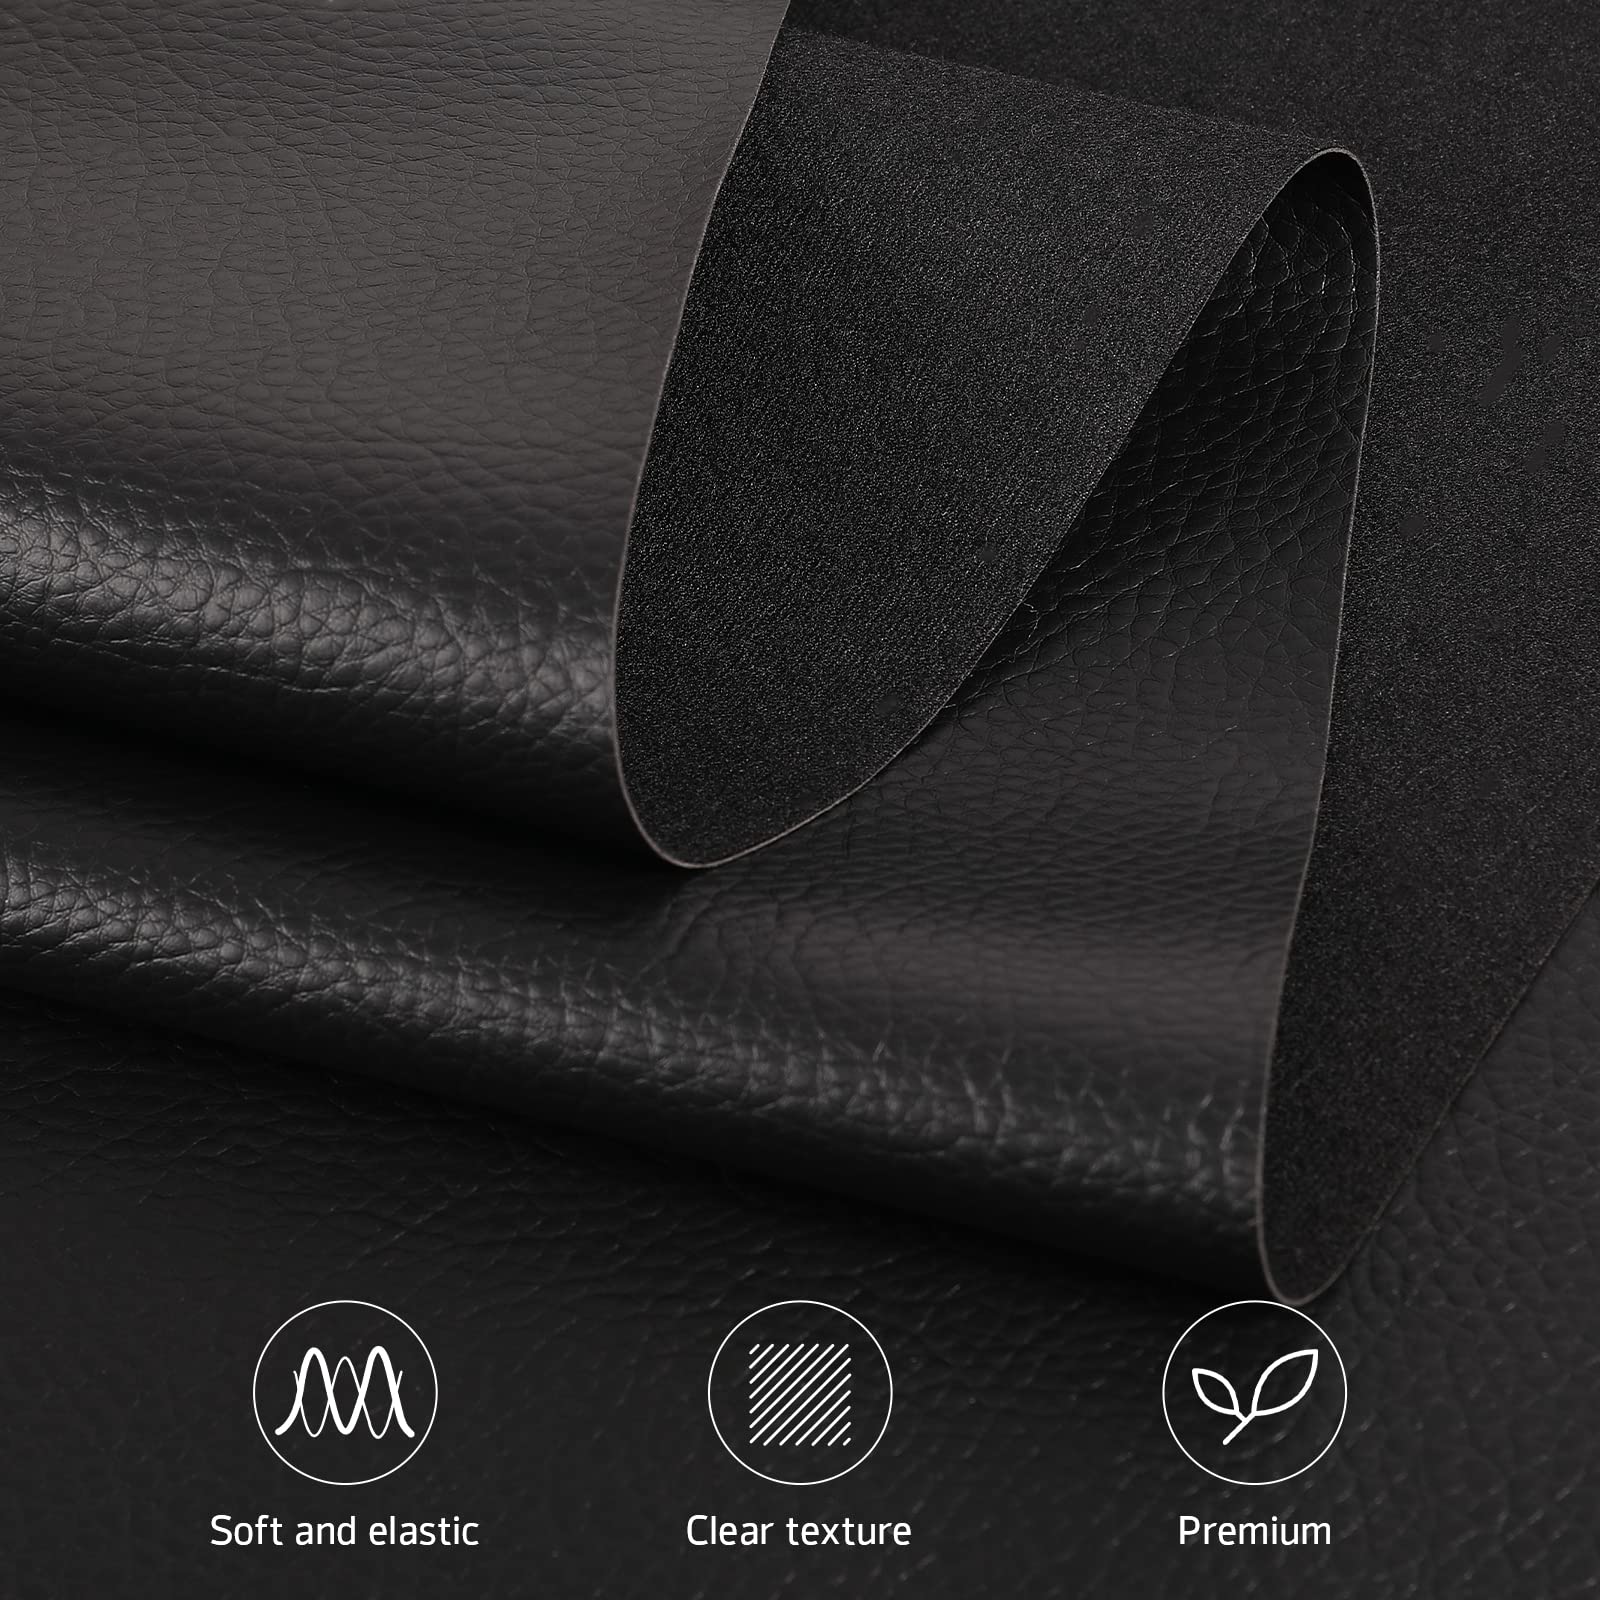 Osunnus Faux Leather Upholstery Fabric by The Yard Vinyl Fabric 55" Wide Outdoor PU Leather Sheets for Home Decor DIY Crafts Chair Furniture Car Marine Upholstery, 1 Yard Black